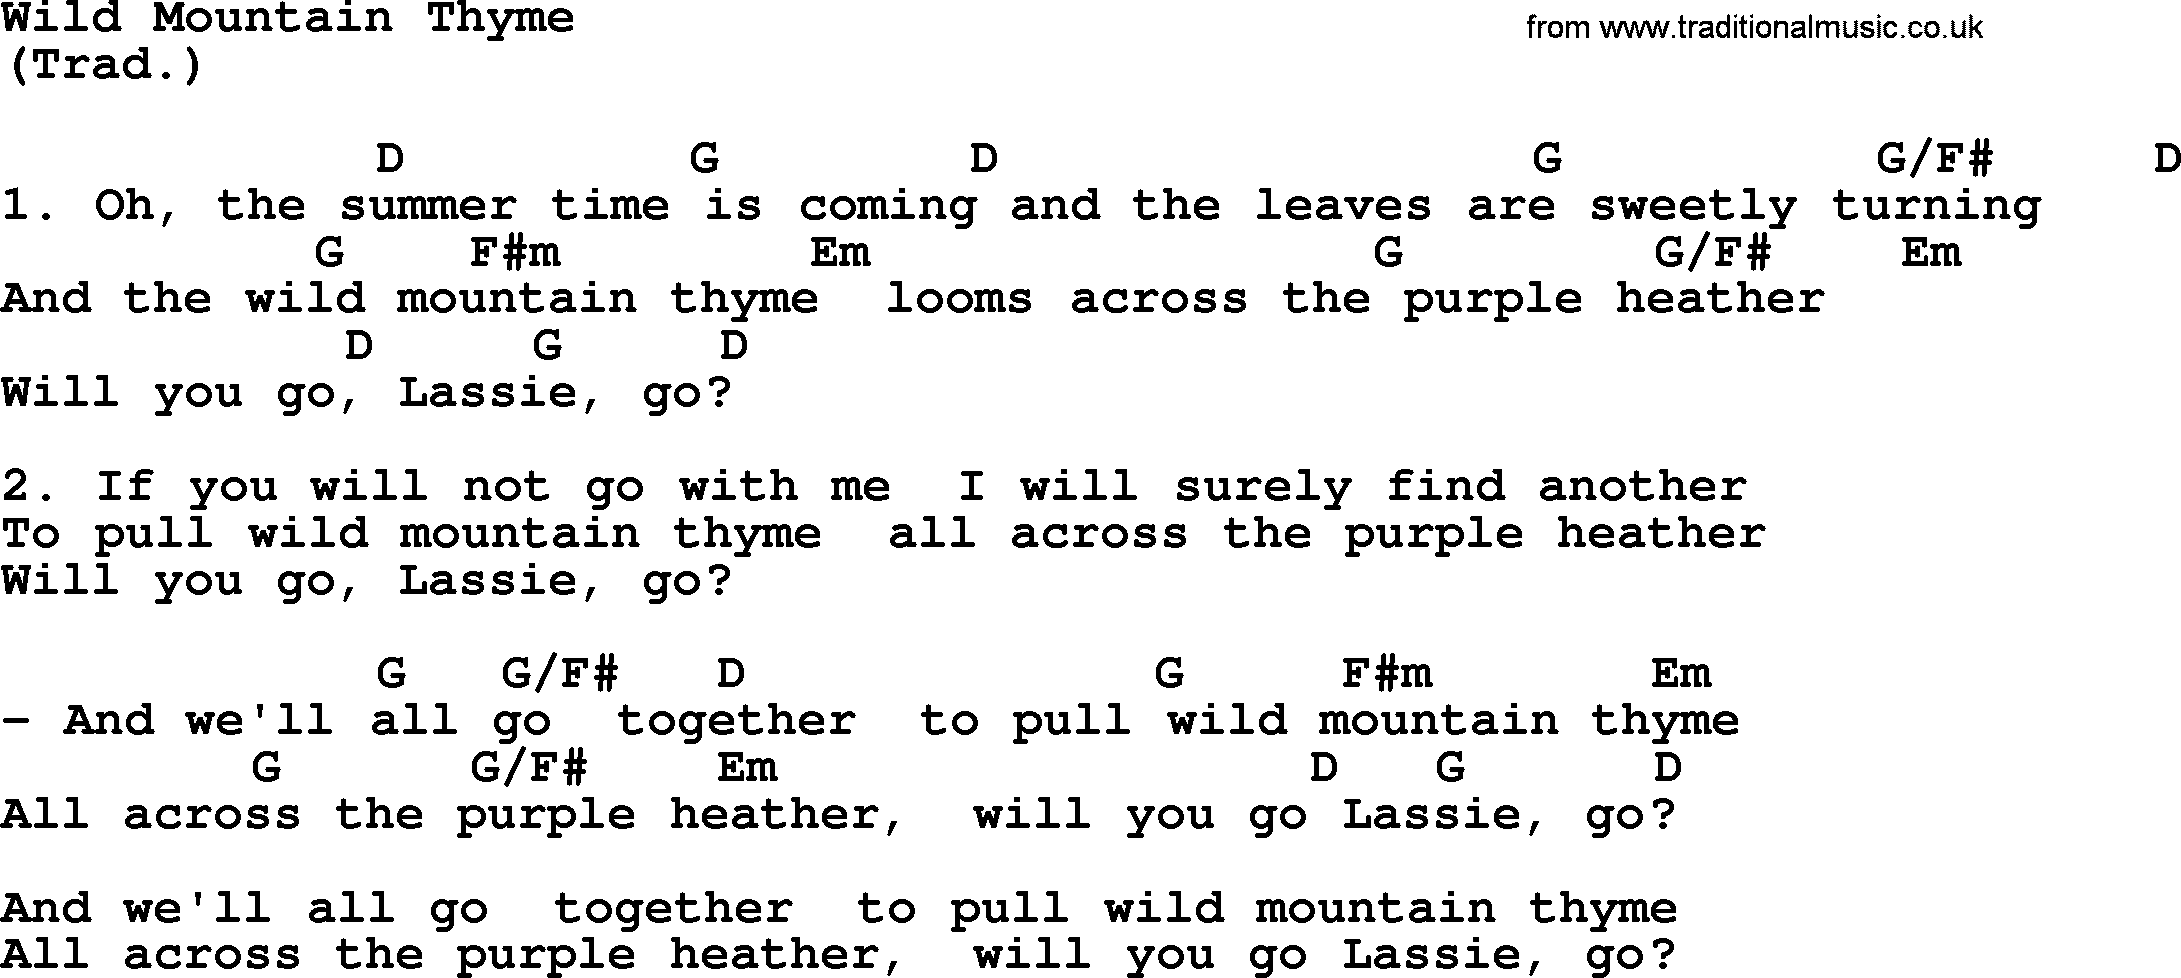 The Byrds song Wild Mountain Thyme, lyrics and chords